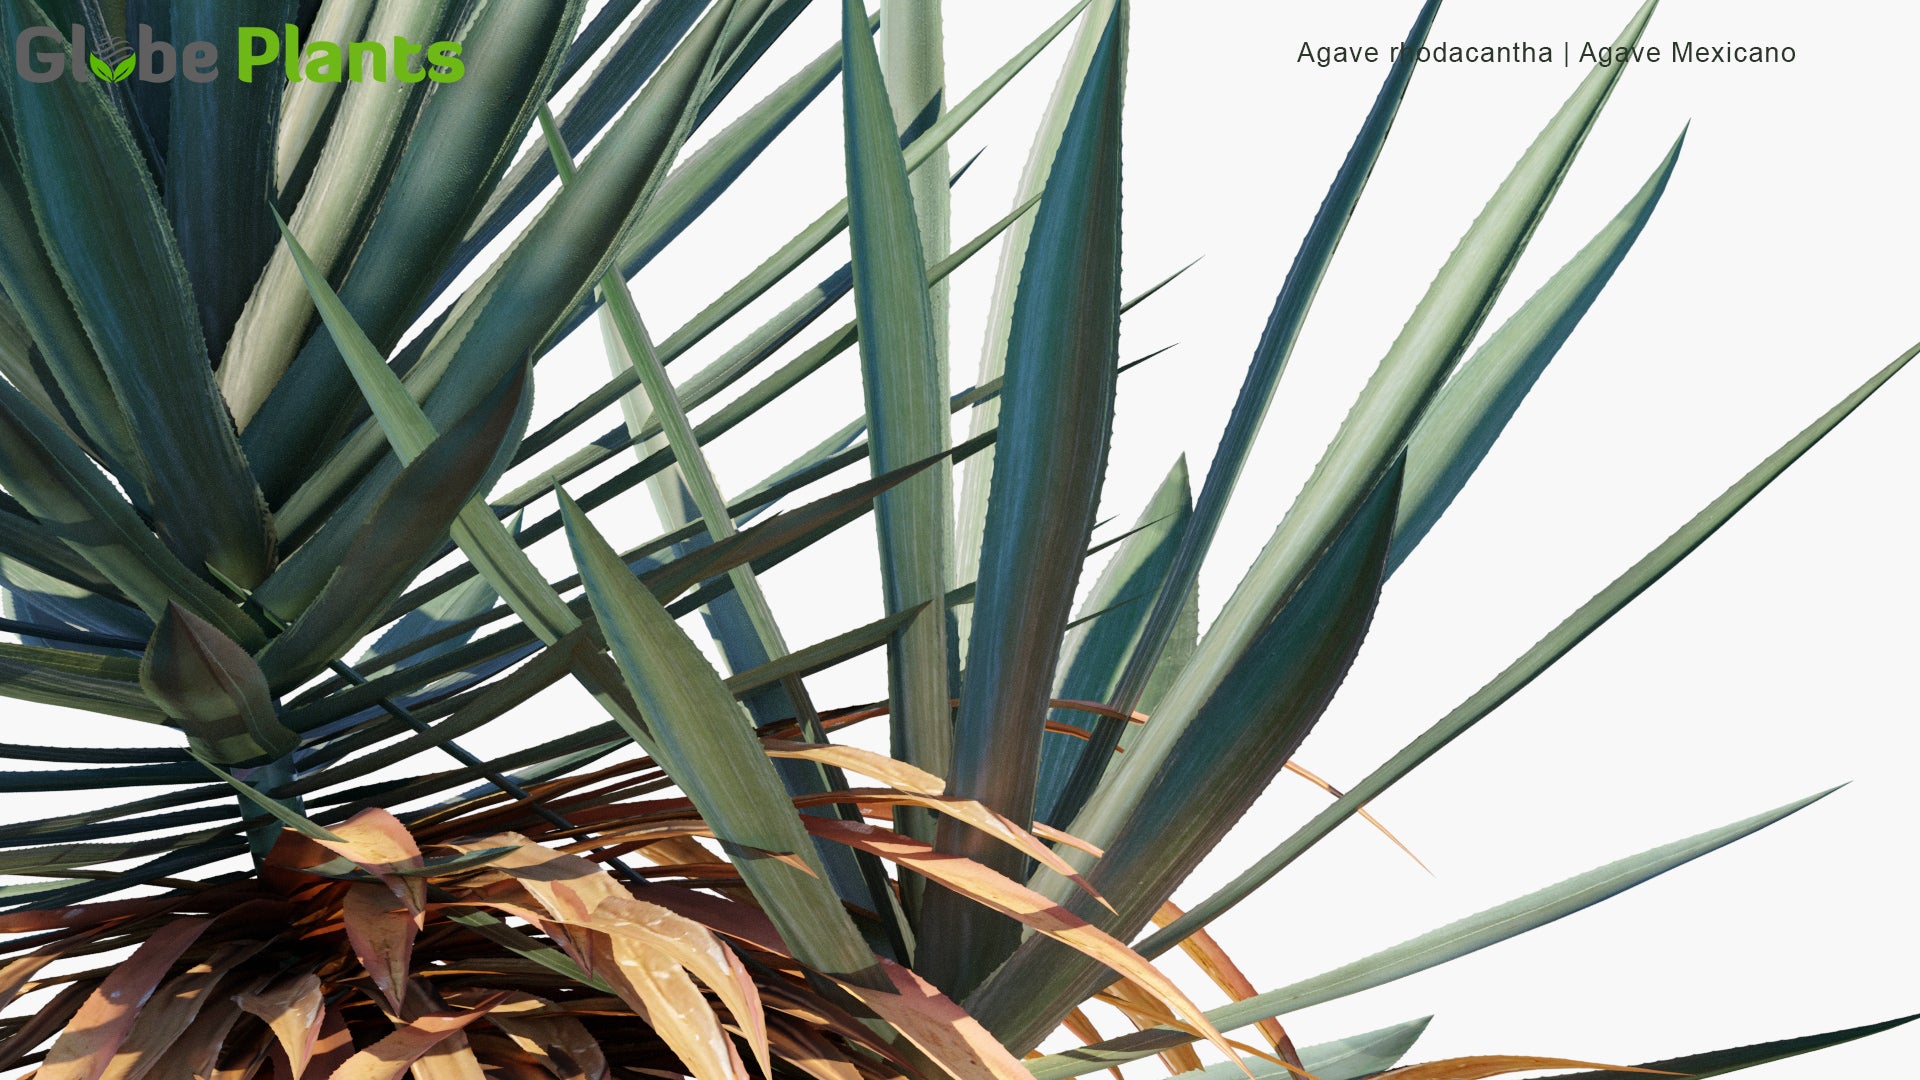 Low Poly Agave Rhodacantha - Agave Mexicano (3D Model)